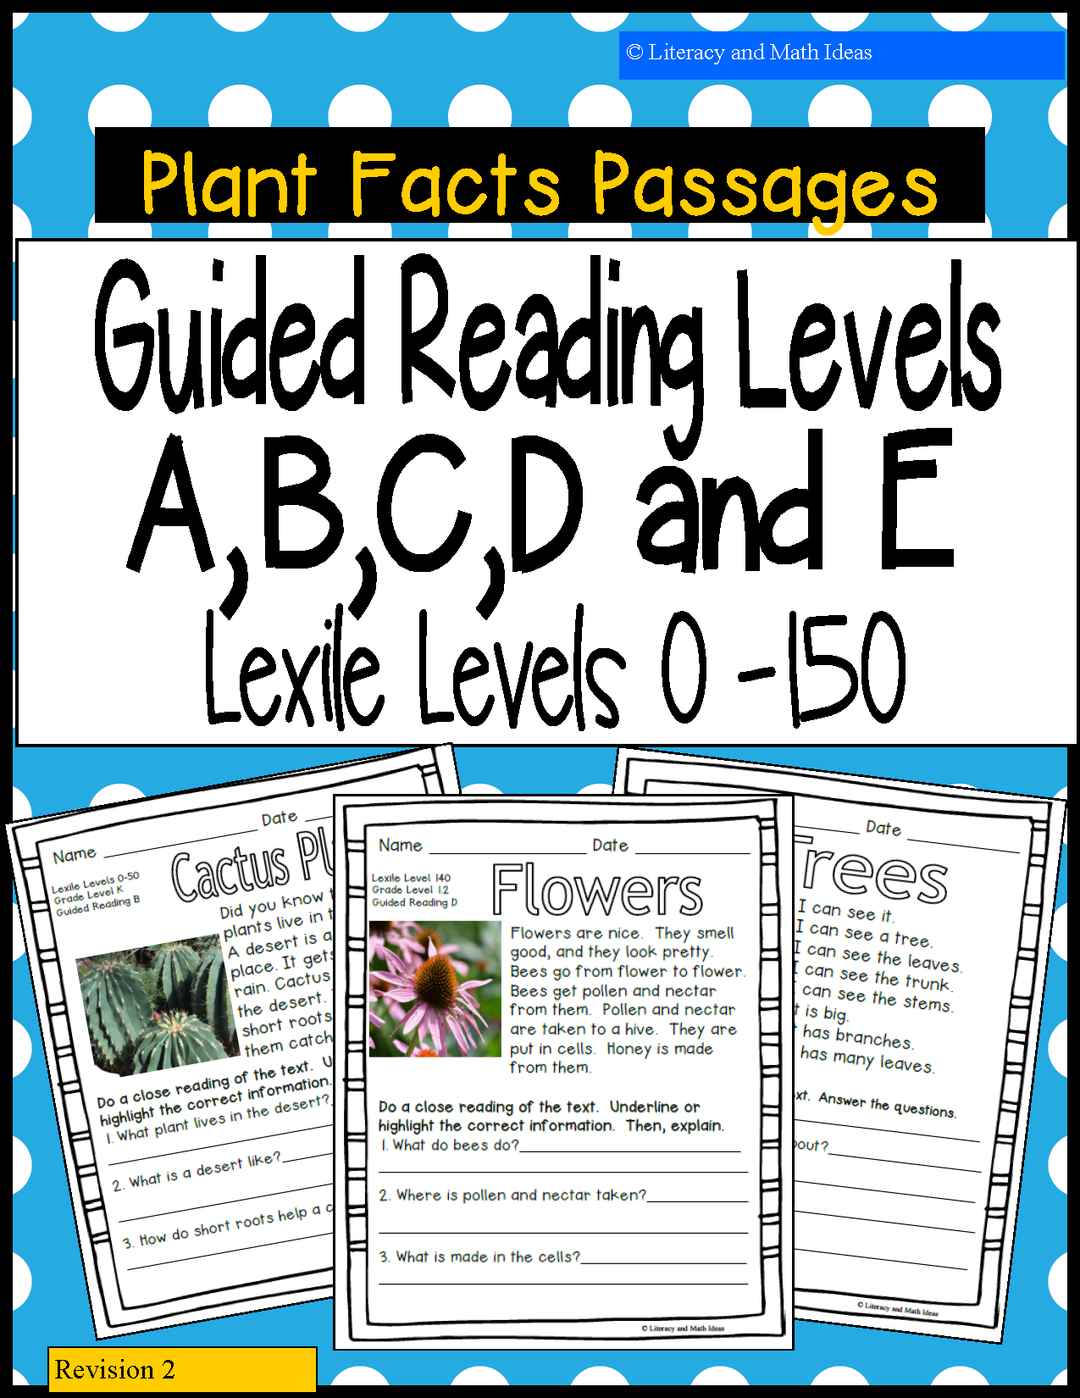 (Plants) Leveled Passages Guided Reading Levels A,B,C,D,E (Lexiles 0-150)